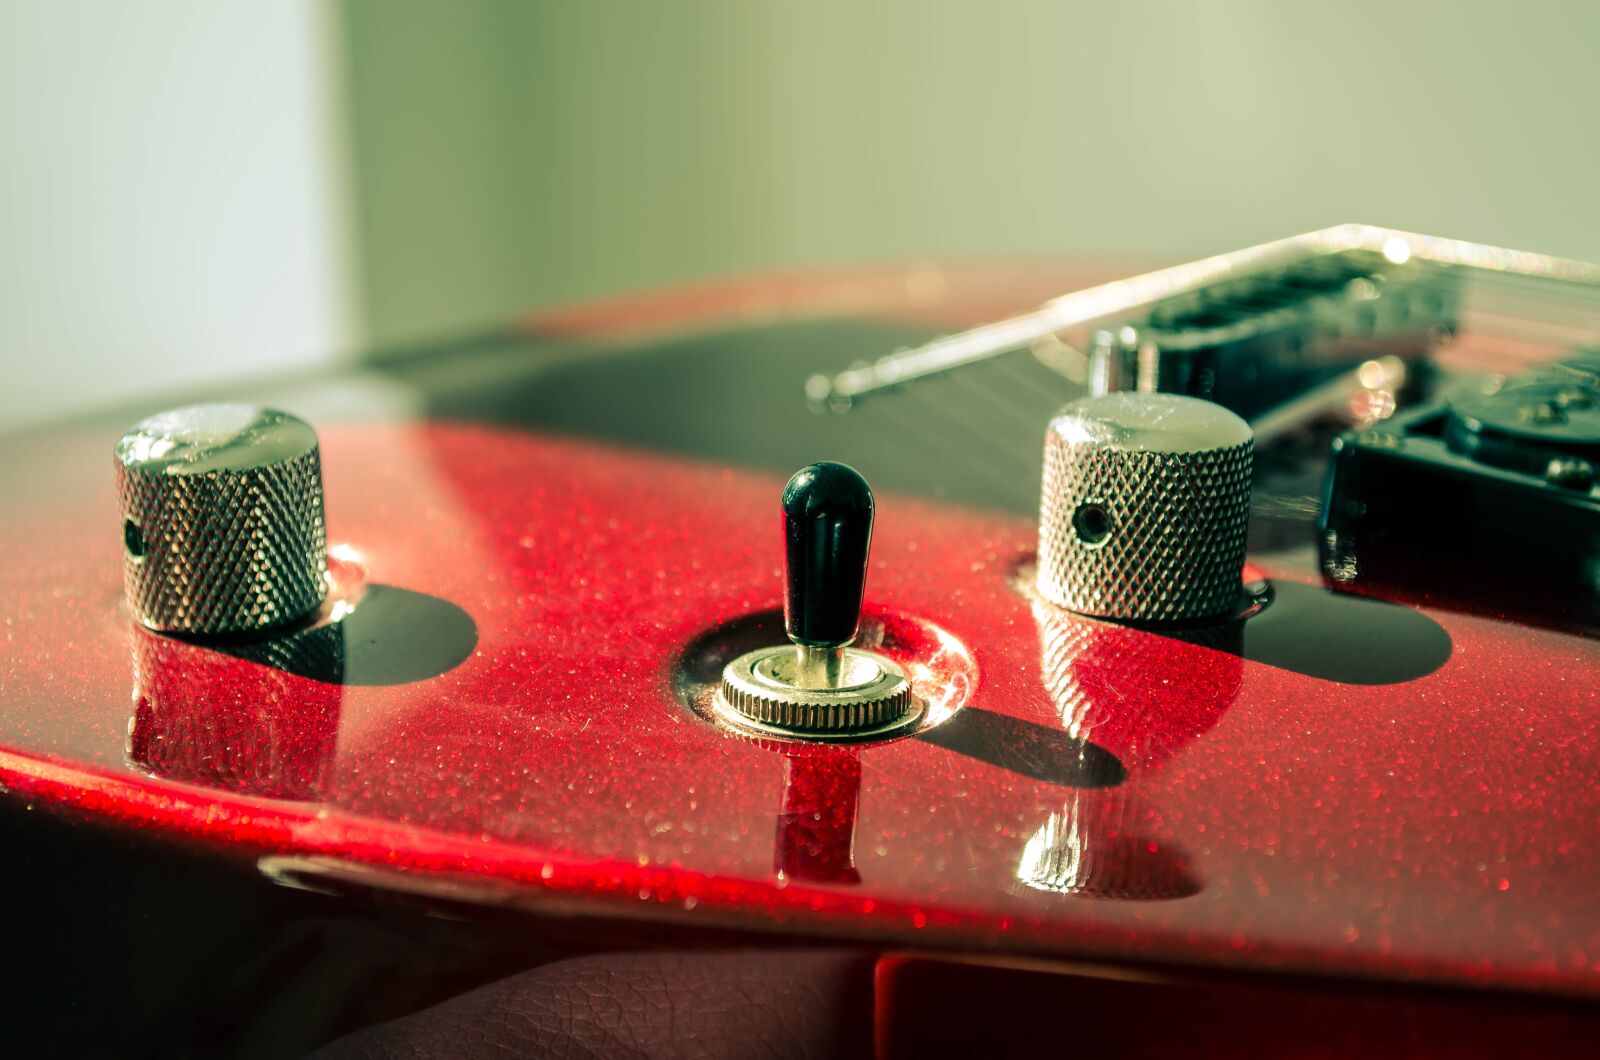 Nikon D5100 sample photo. Guitar, switches, spinner photography